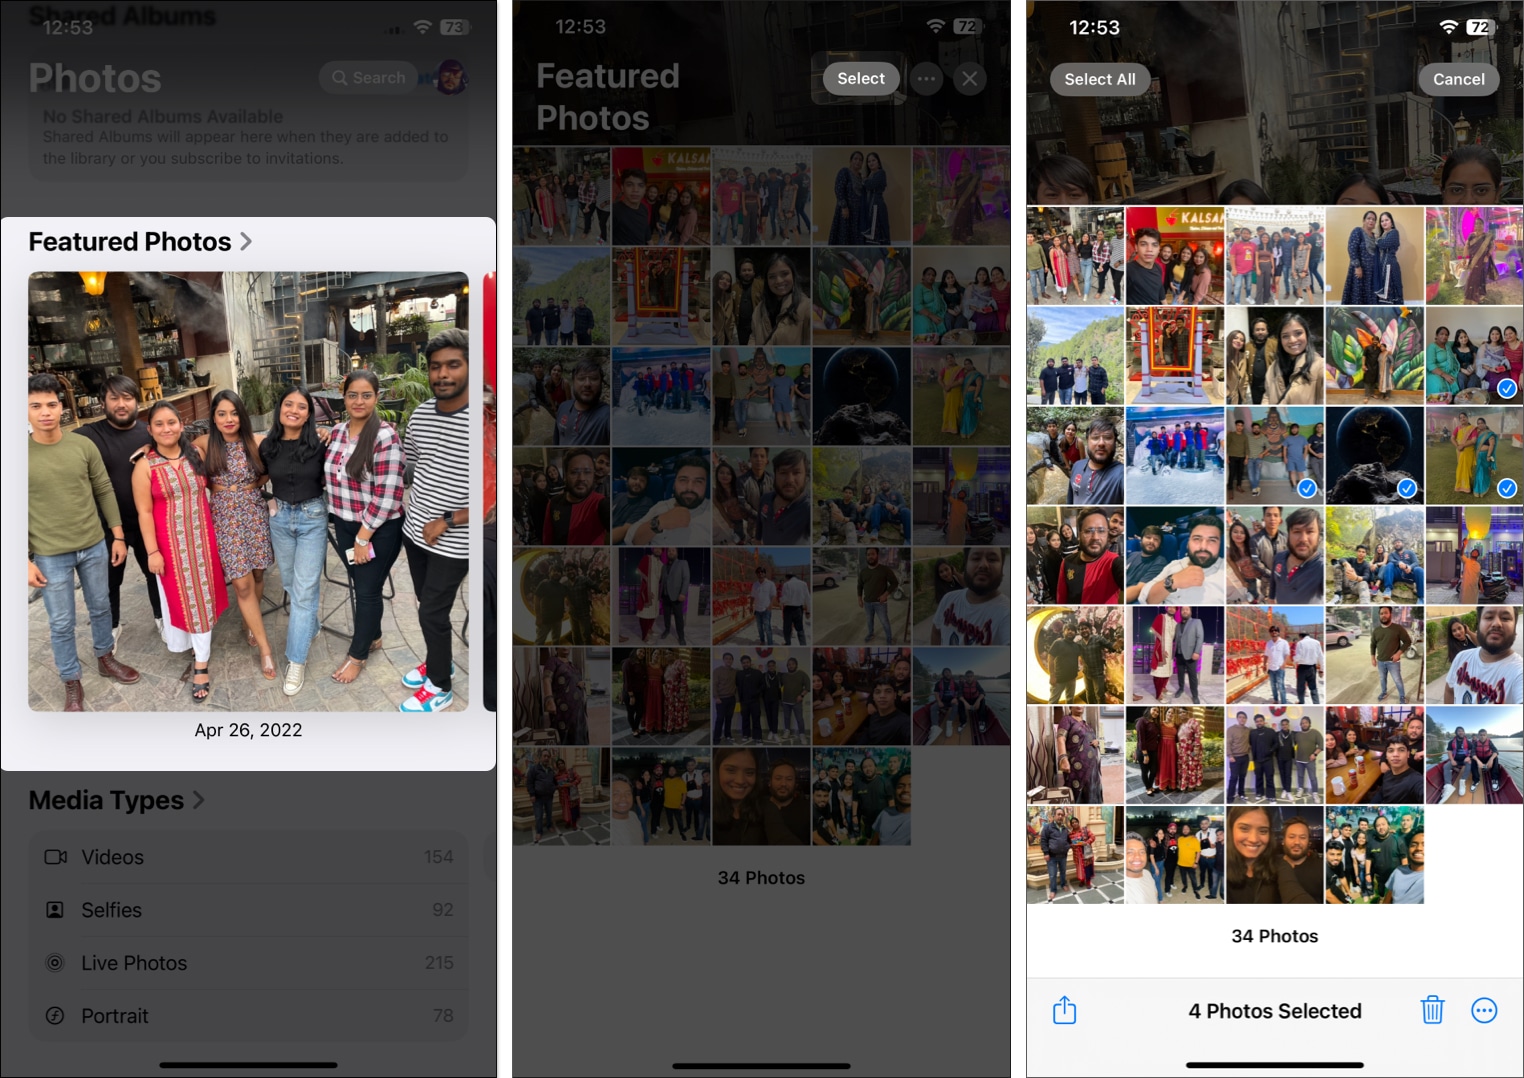 Select photos from Featured Photos on iPhone